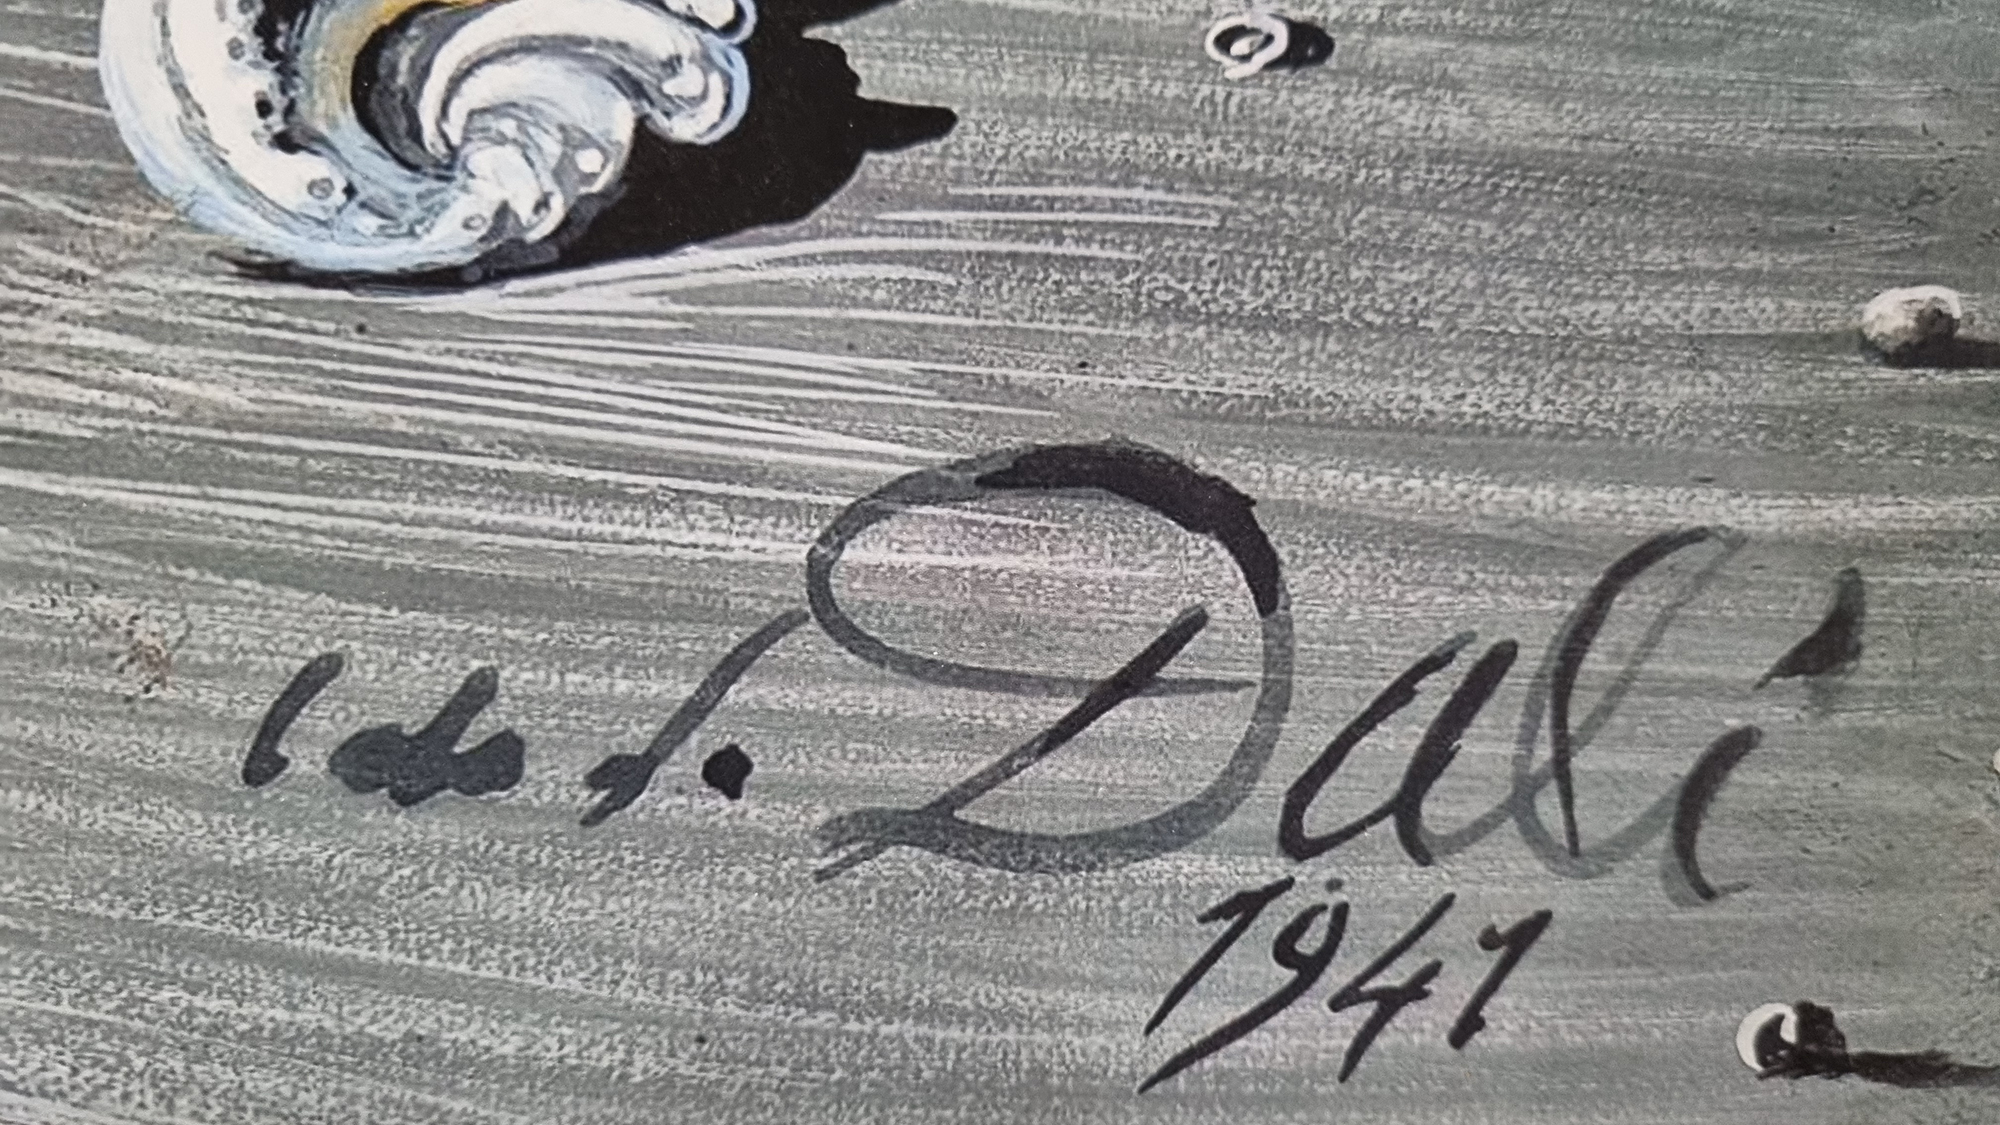 Salvador Dali Limited Edition One of only 95 Published. - Image 7 of 7